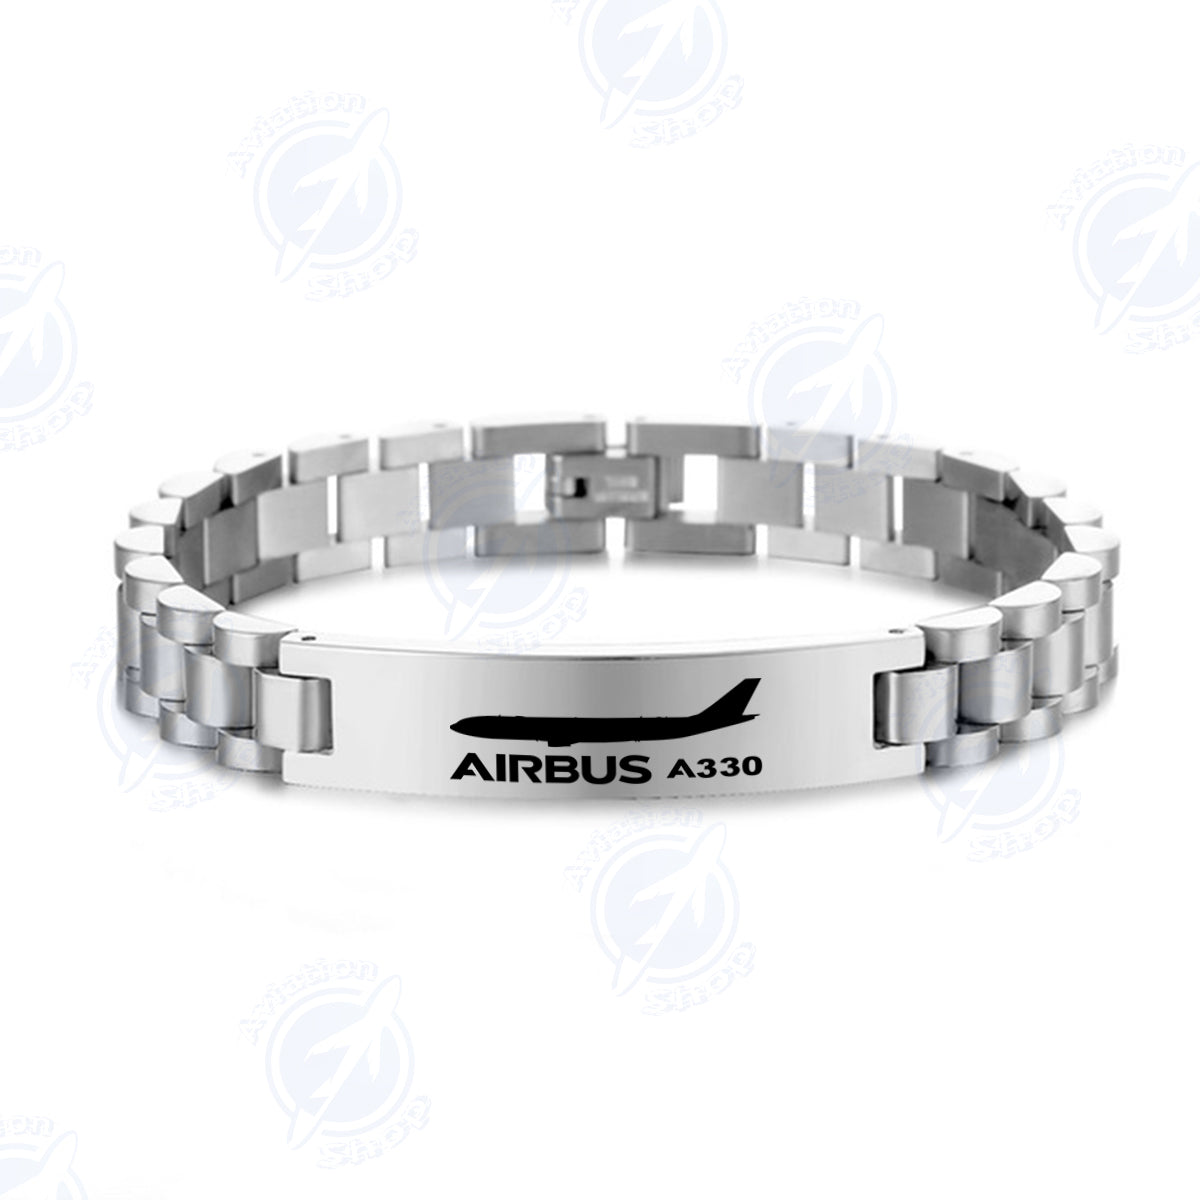 The Airbus A330 Designed Stainless Steel Chain Bracelets